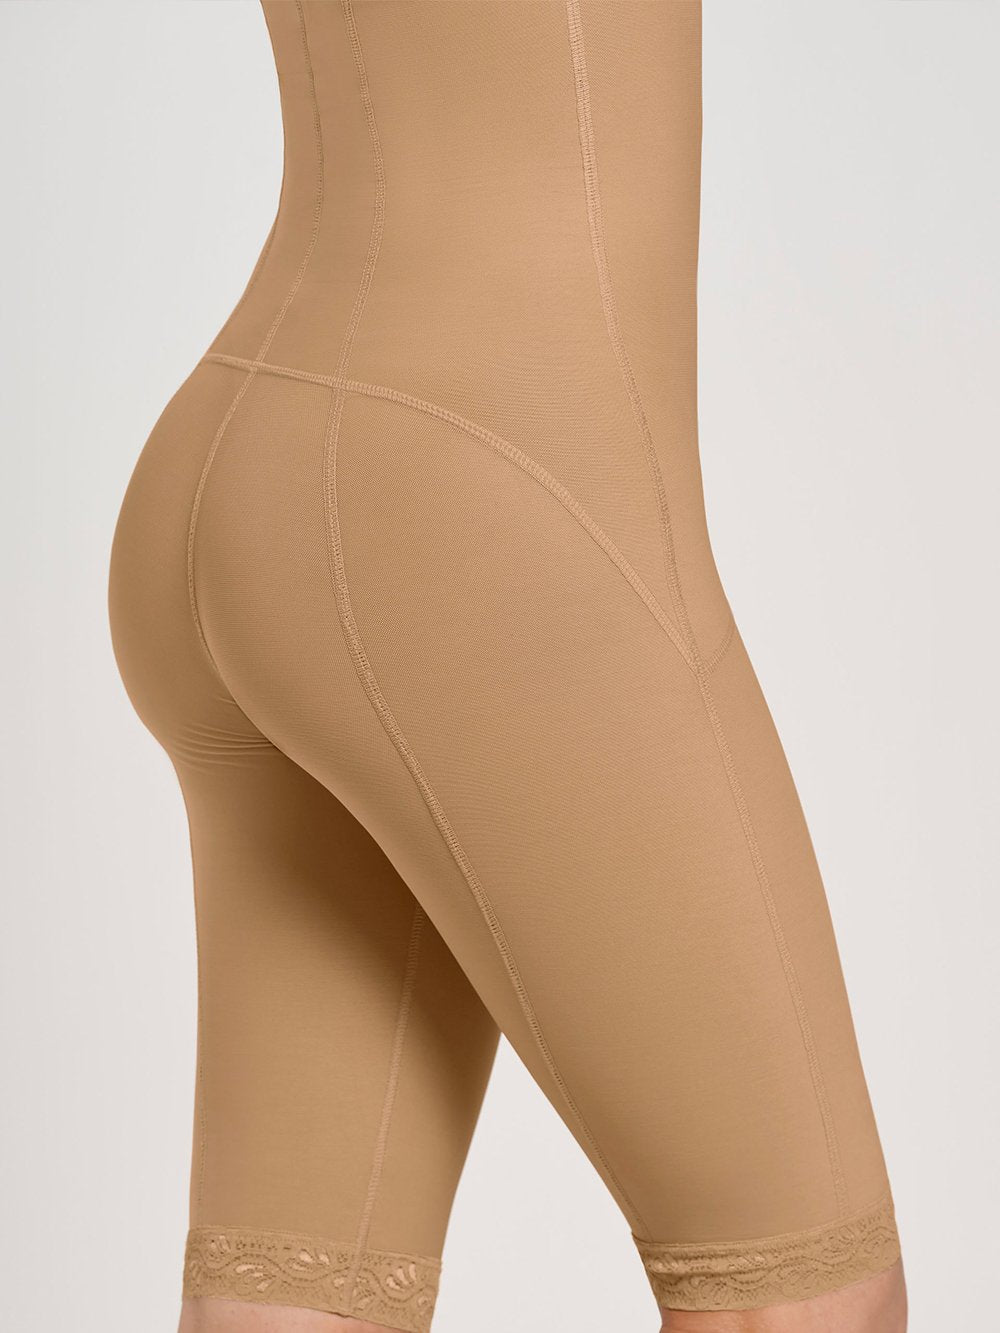 Leonisa Shapewear Knee-Length Body Shaper with Firm Compression